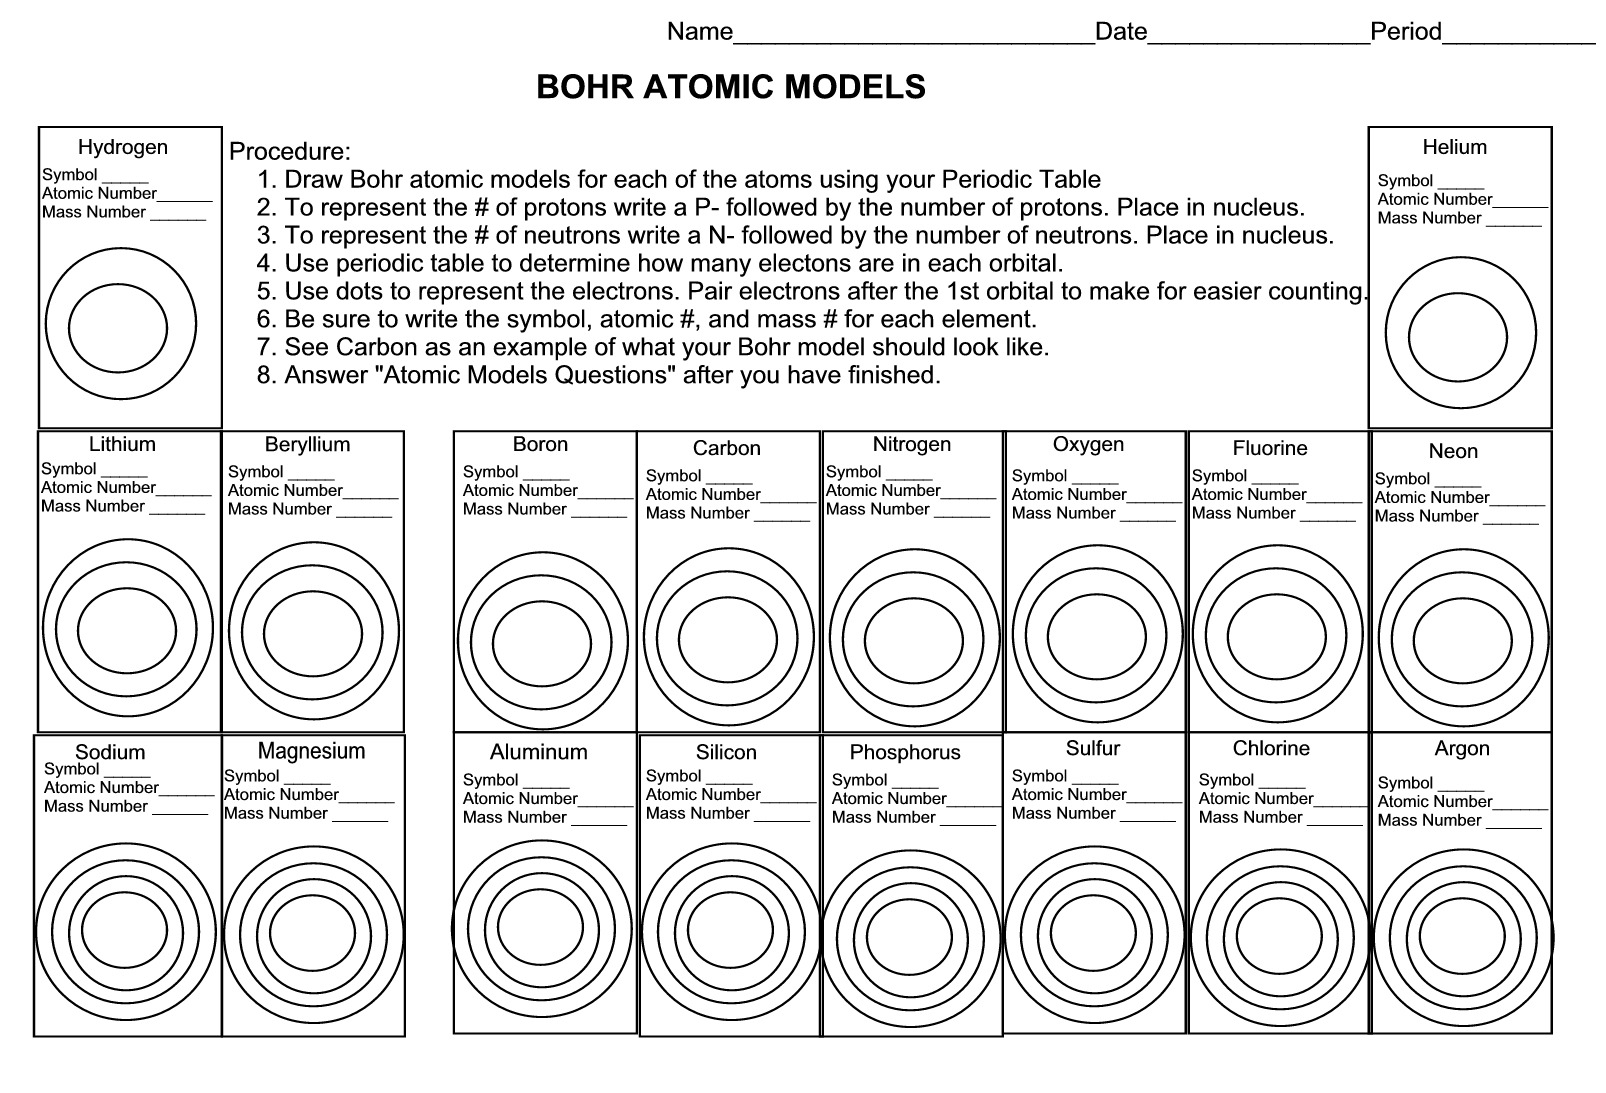 Science and Math 11 - SCIENCE AND MATH WITH MS. SMYTH With Bohr Atomic Models Worksheet Answers